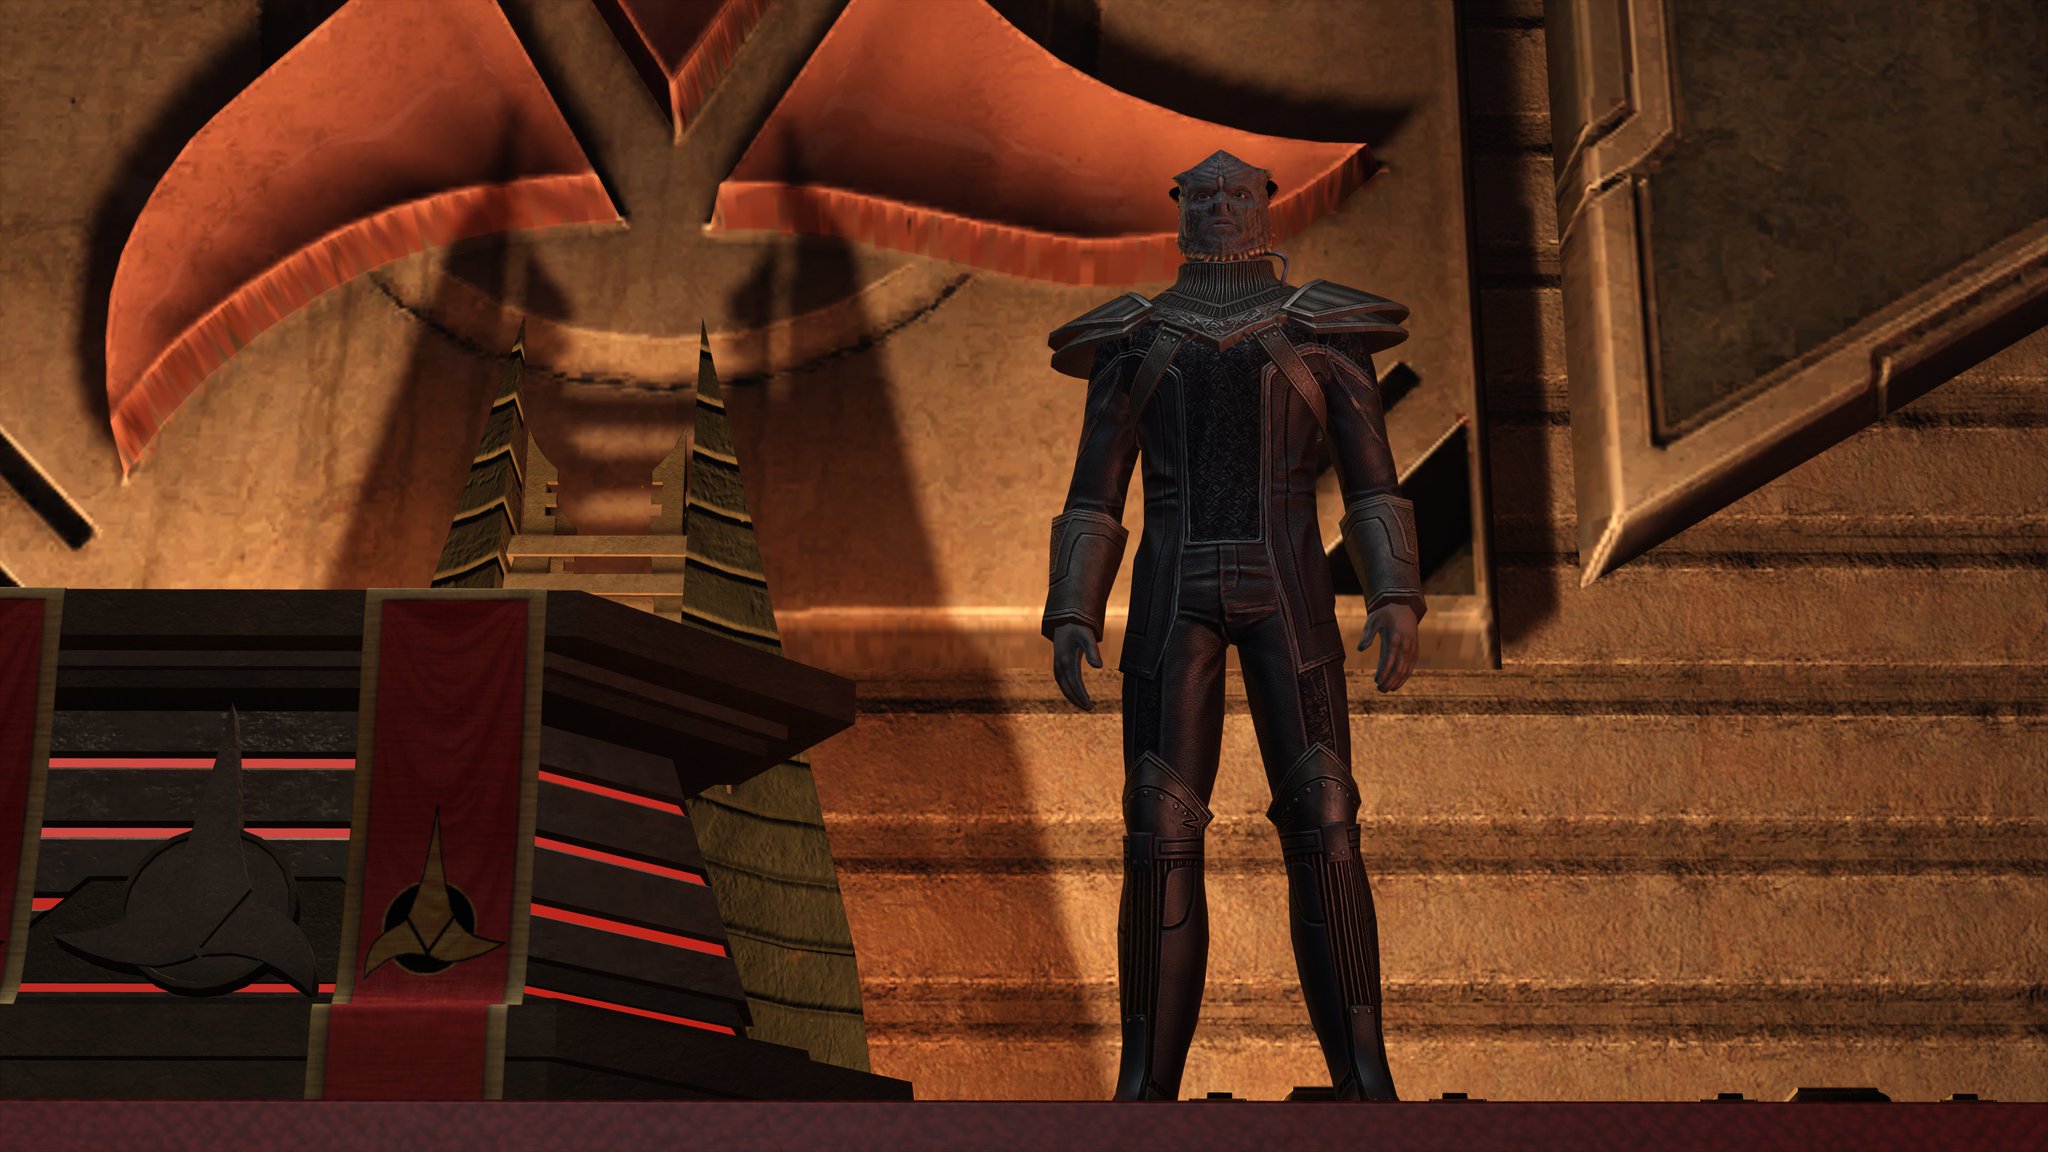 Star Trek Online Serve The Empire And Your Gods With The Jem Hadar Klingon Uniform Coming For Free On Pc To Kdf Jem Hadar Characters With Tomorrow S Maintenance T Co Ydtukjx1fg